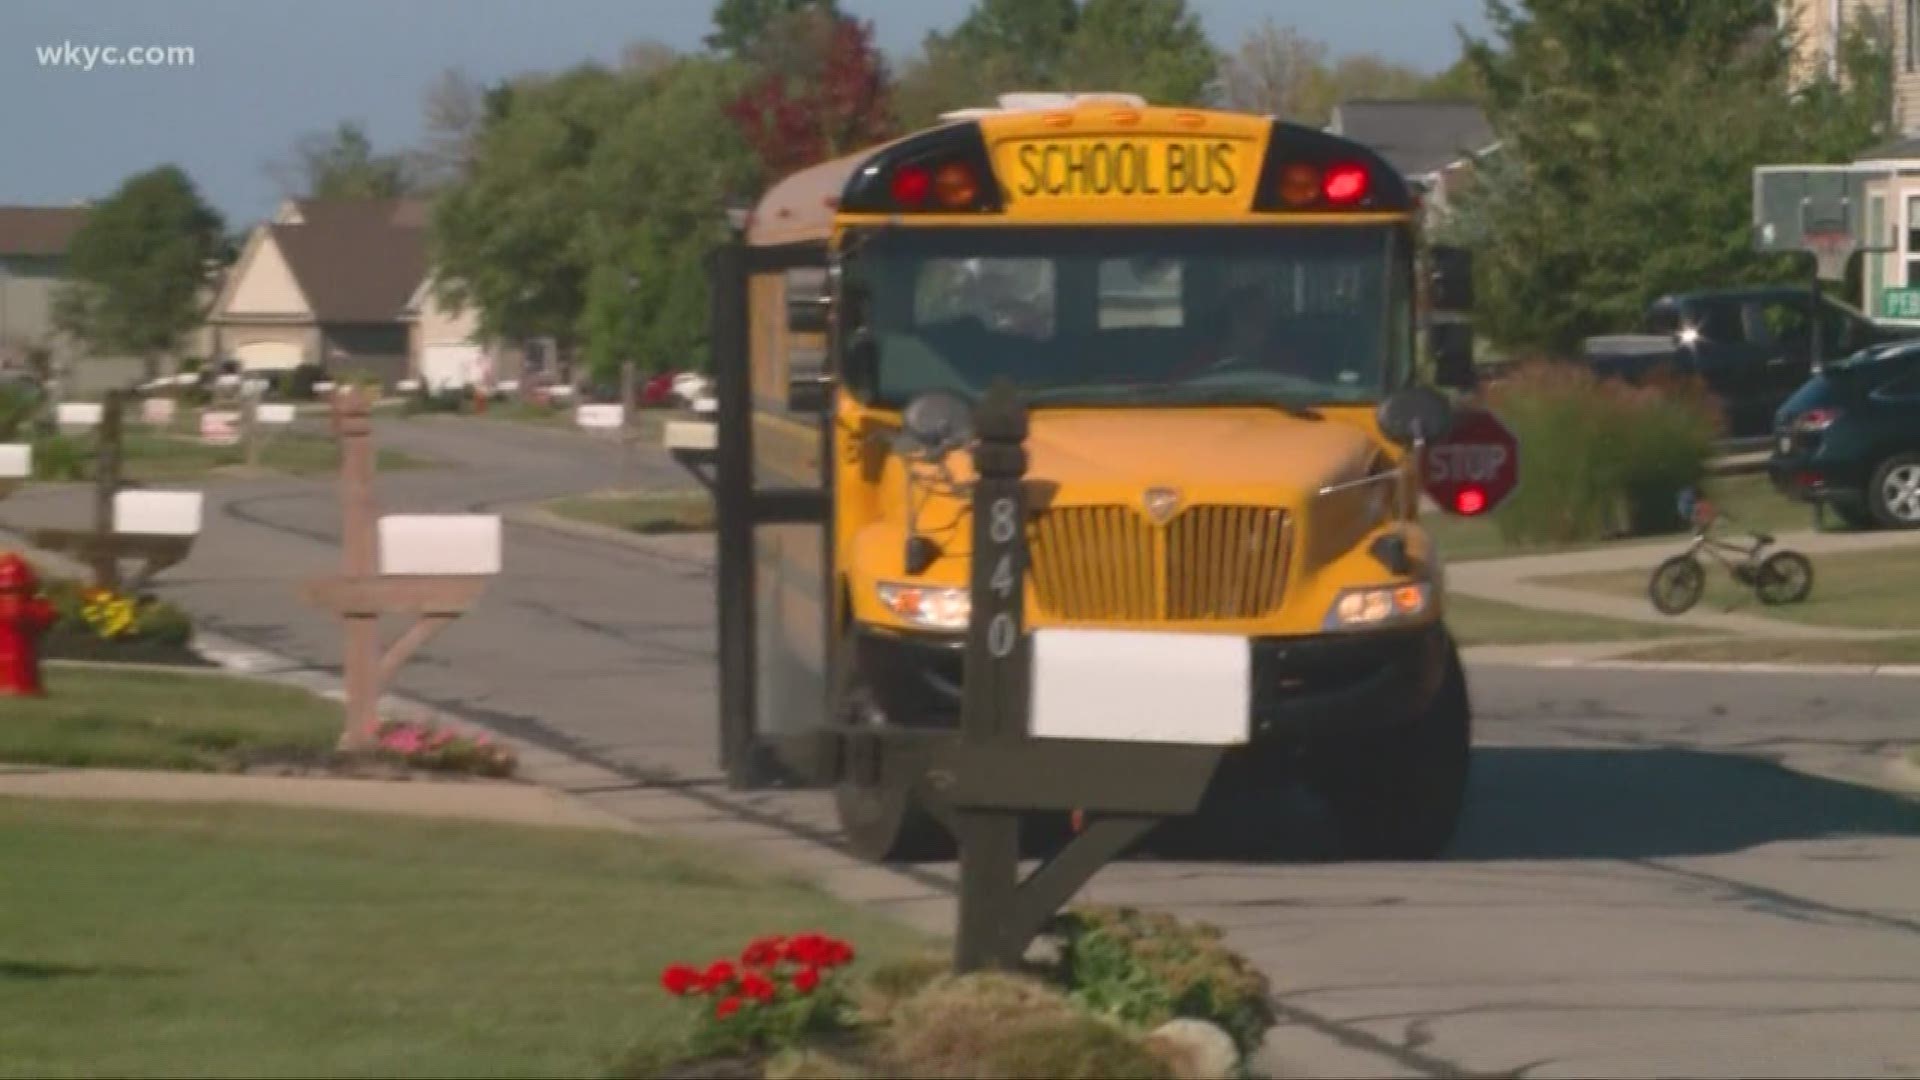 Resource officers are now riding on school buses to catch those that pass buses illegally. Some cities are even increasing penalties.